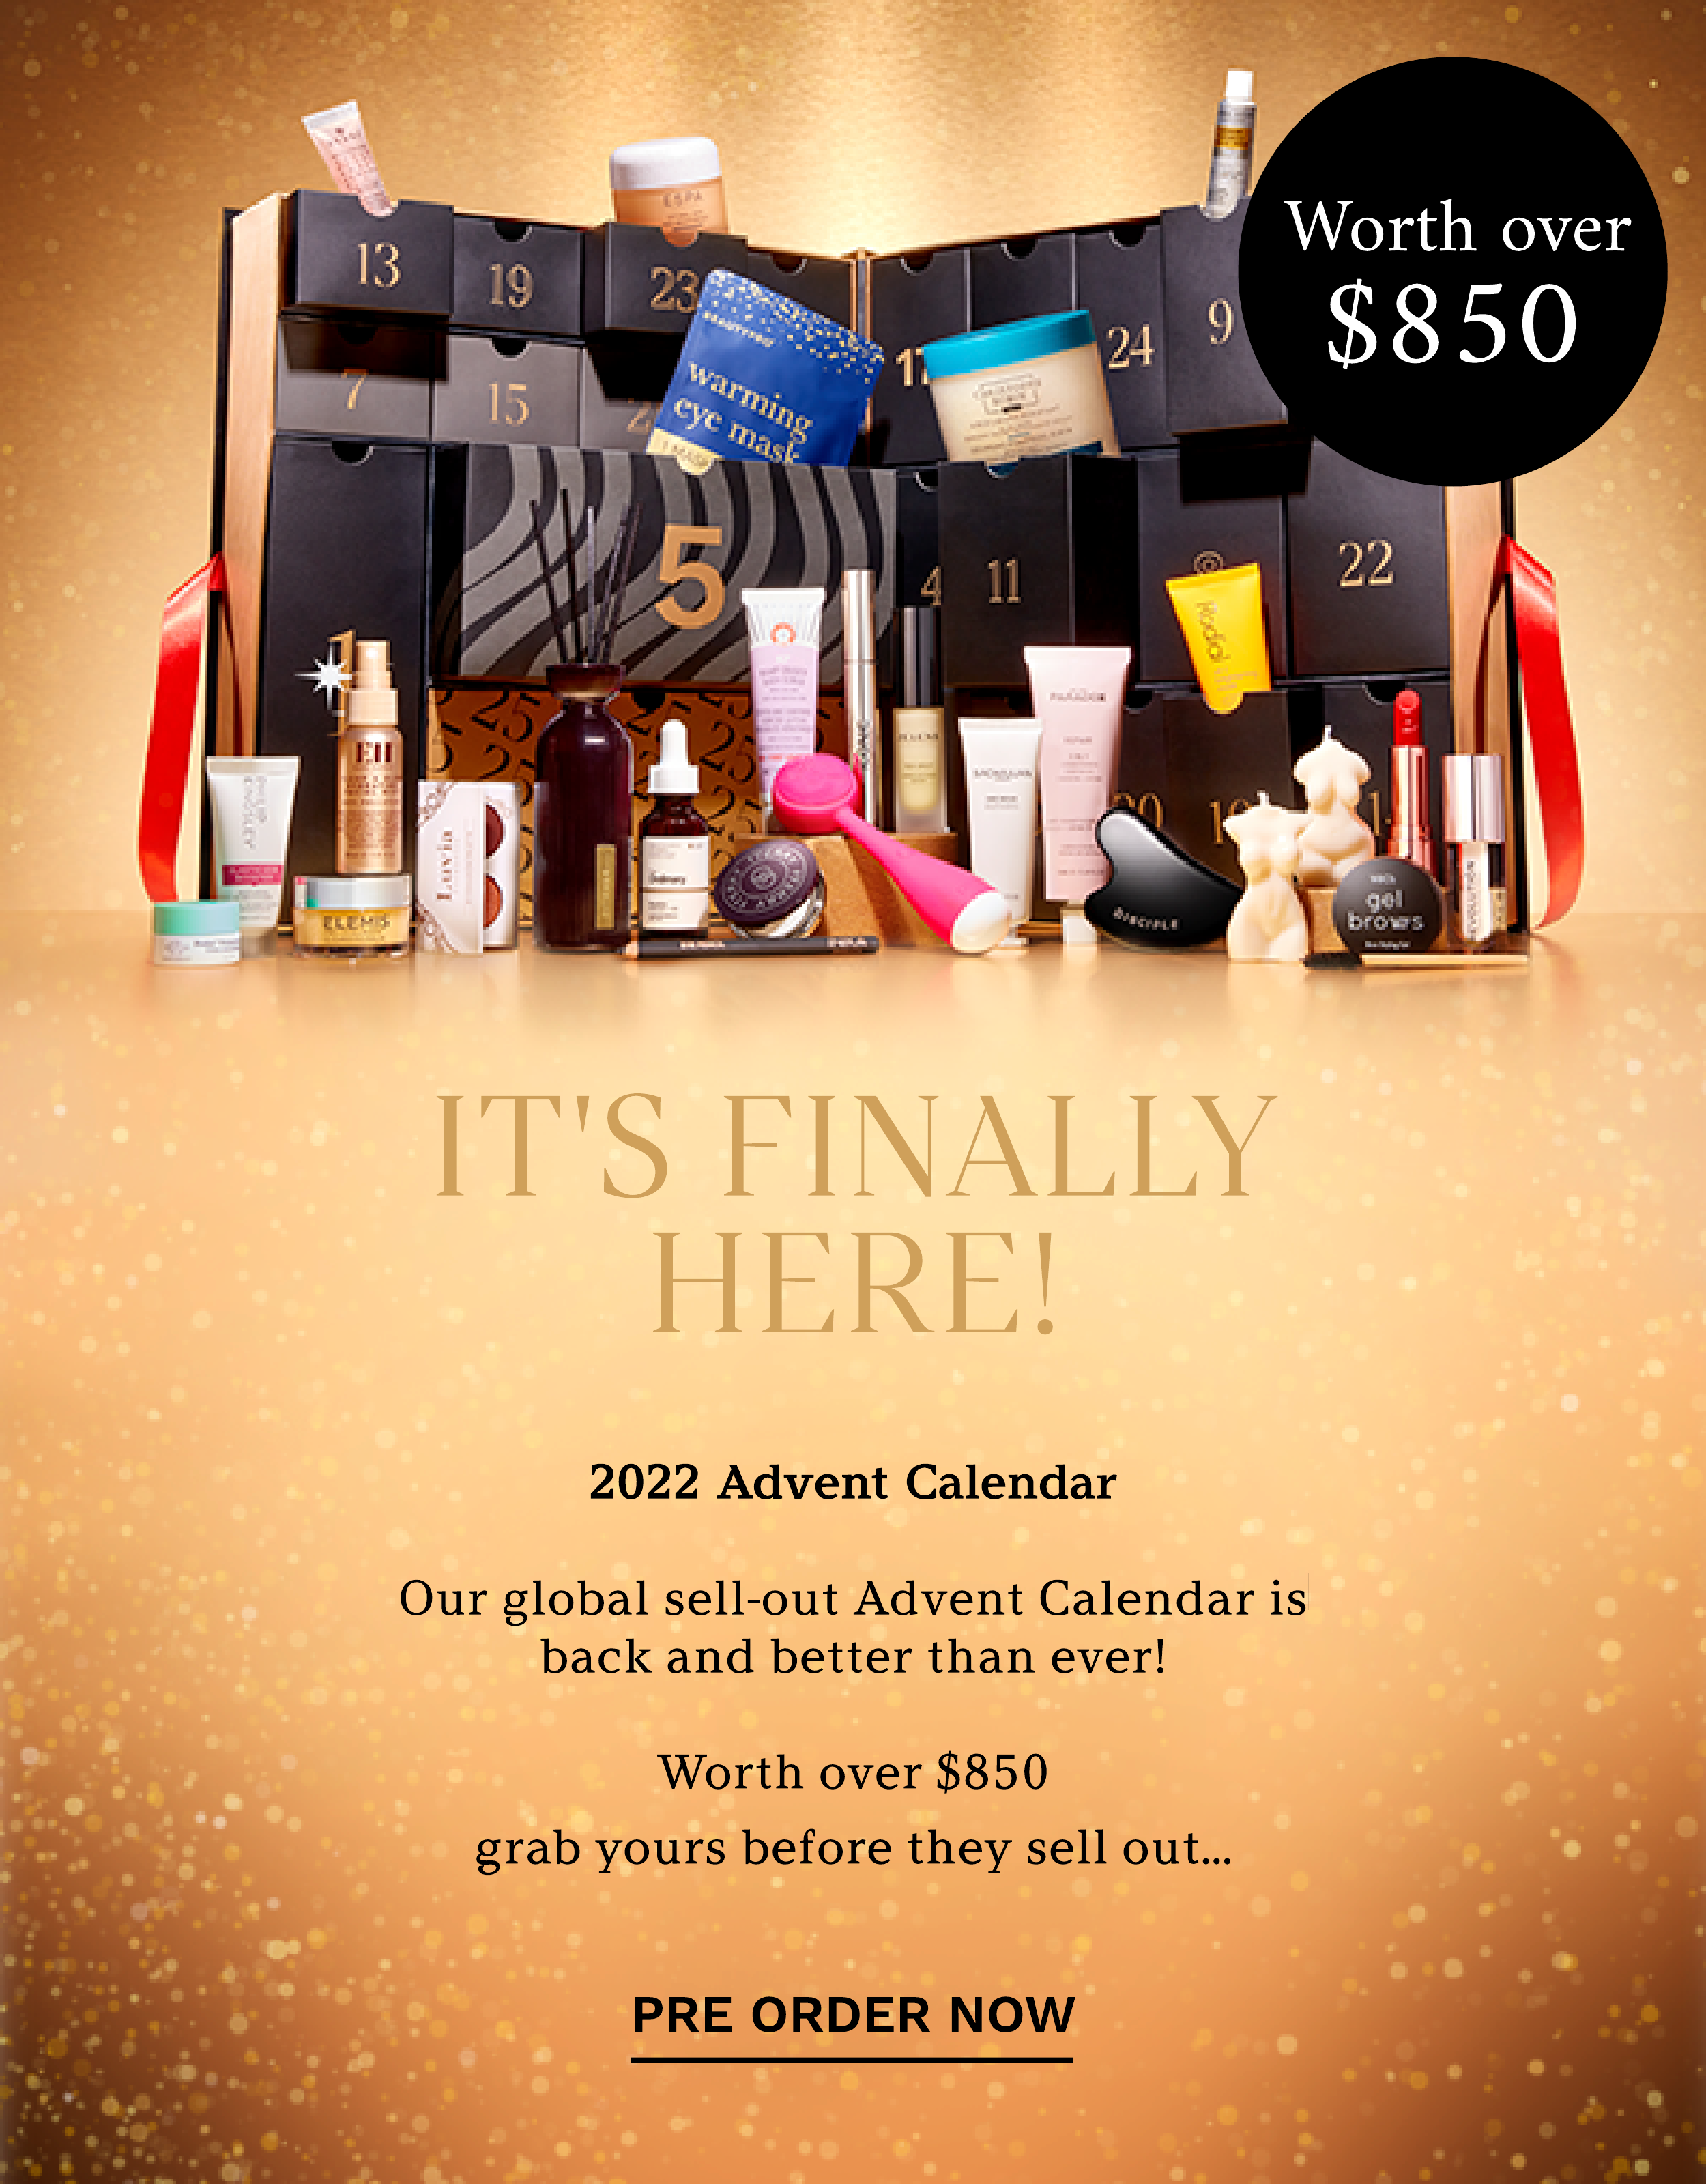 h WSRO 2022 Advent Calendar Our global sell-out Advent Calendar is back and better than ever! Worth over $850 grab yours before they sell out... PRE ORDER NOW 